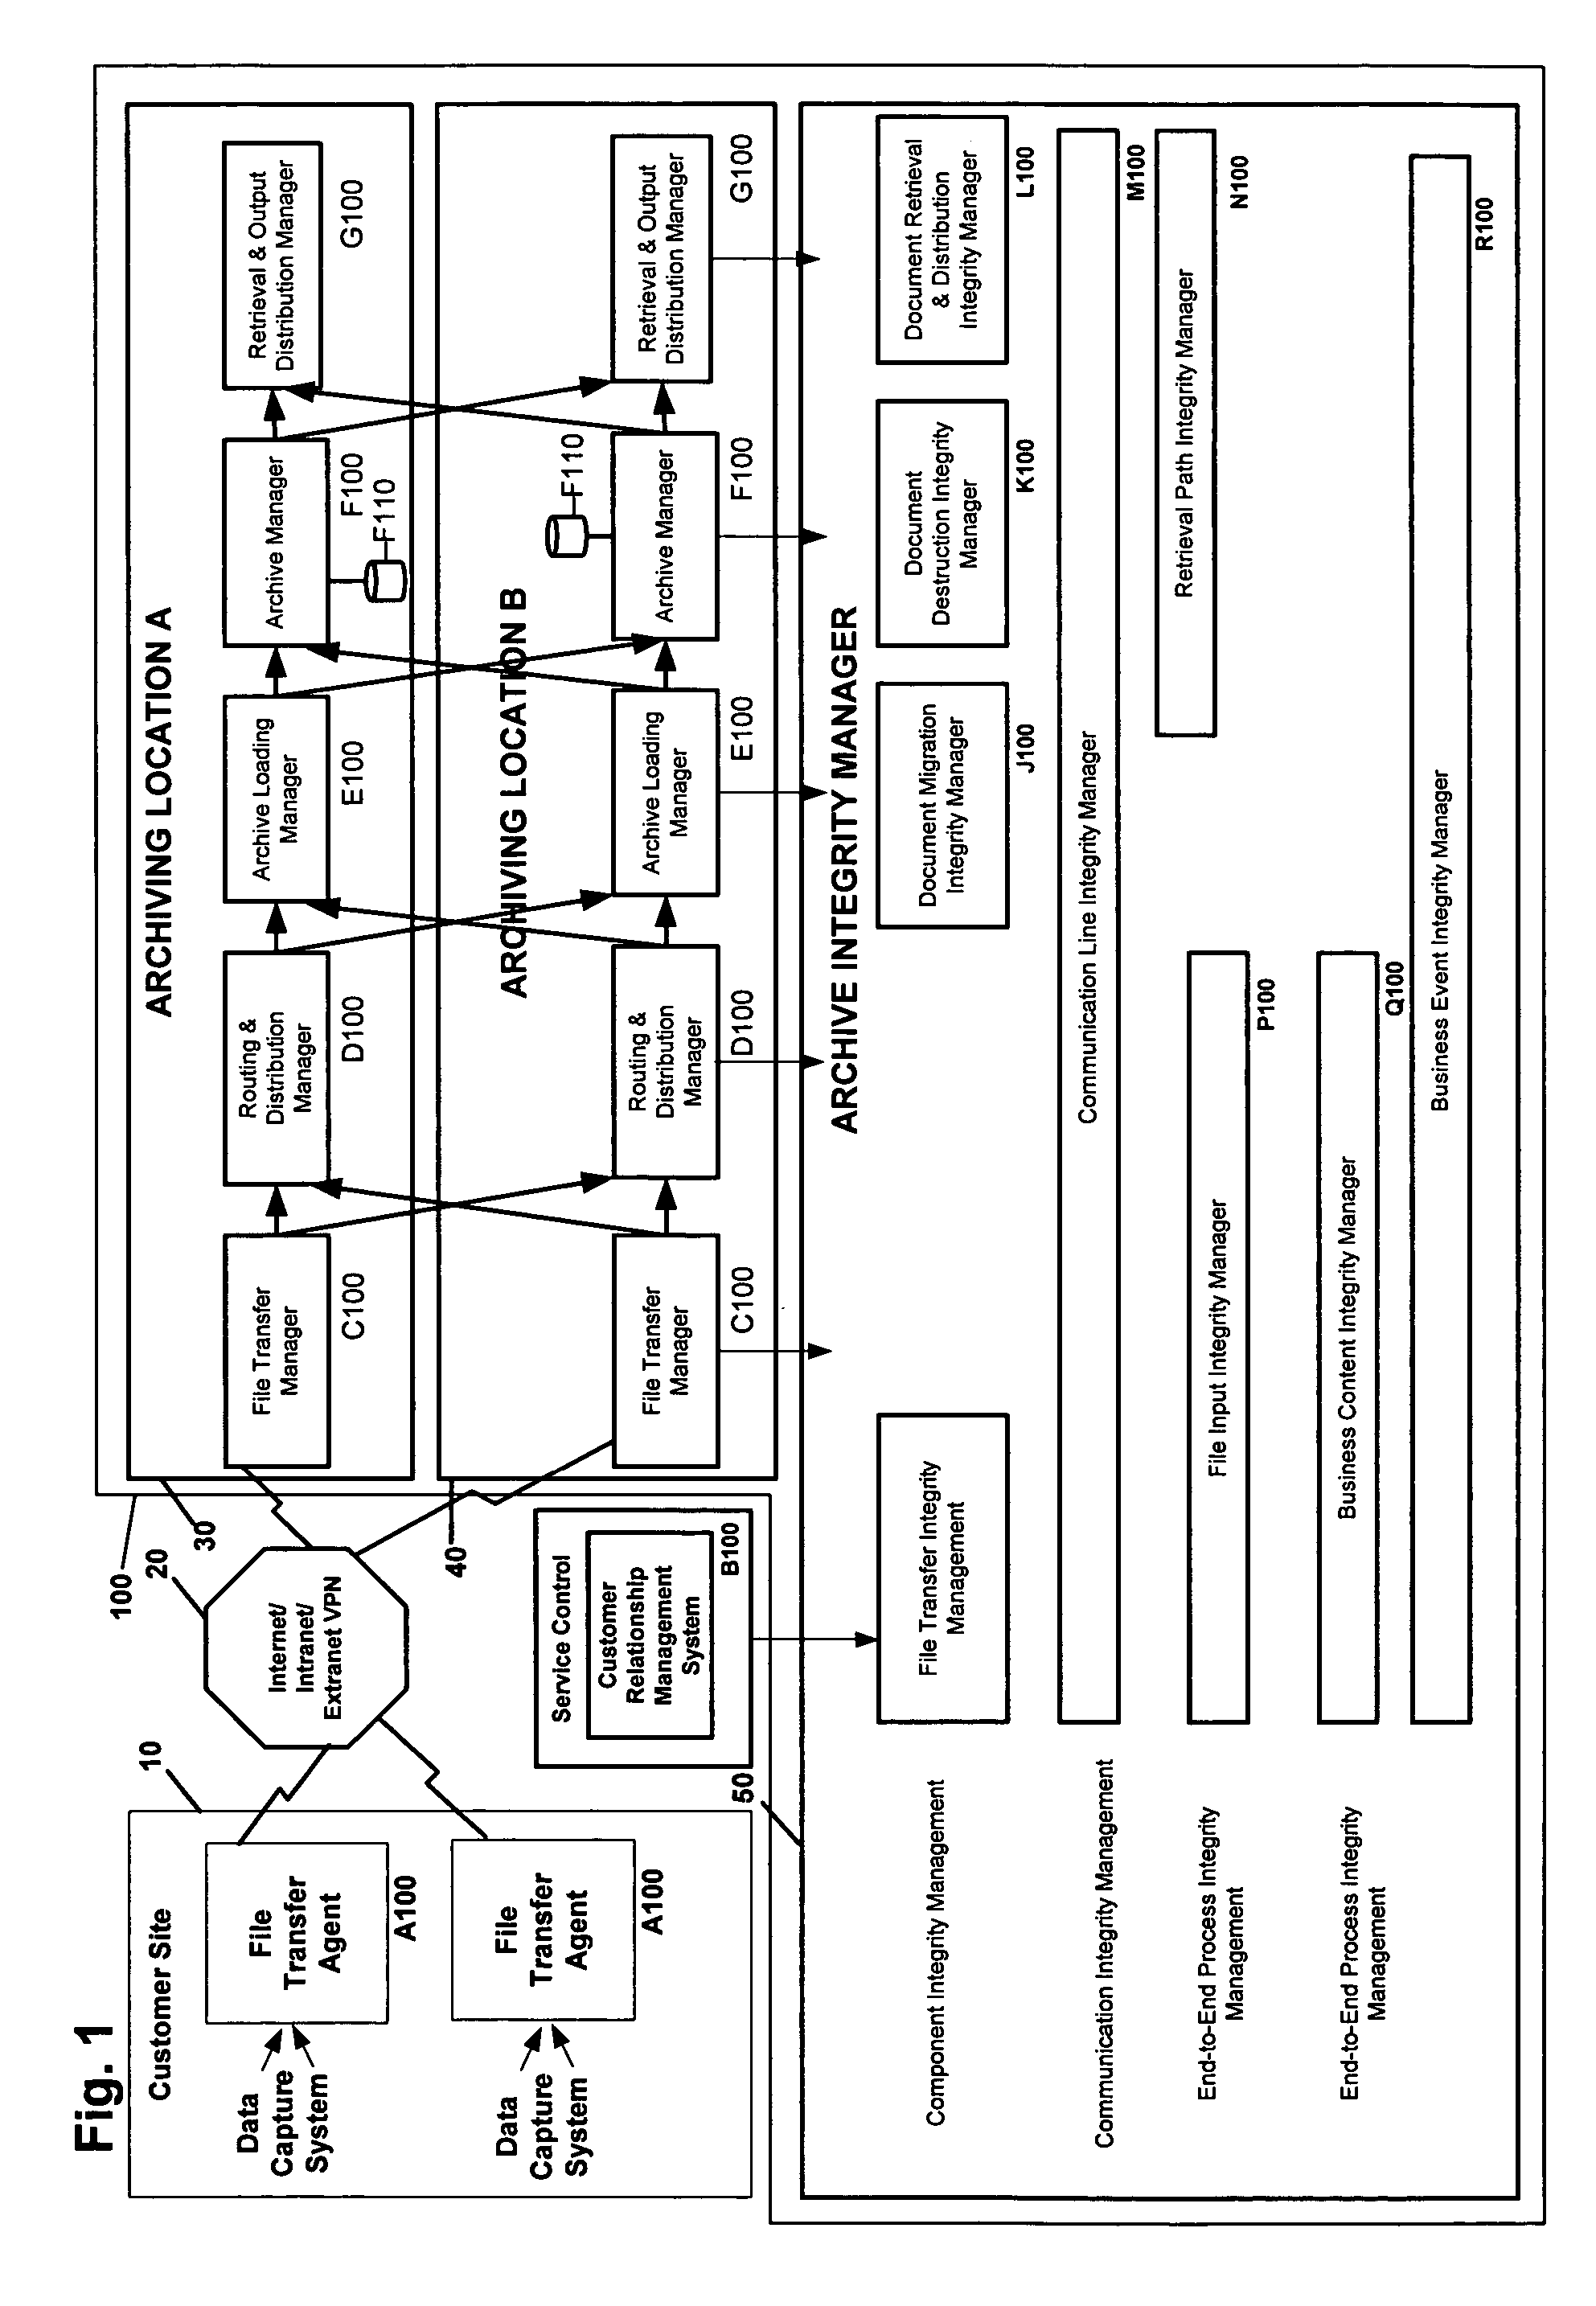 System for archive integrity management and related methods